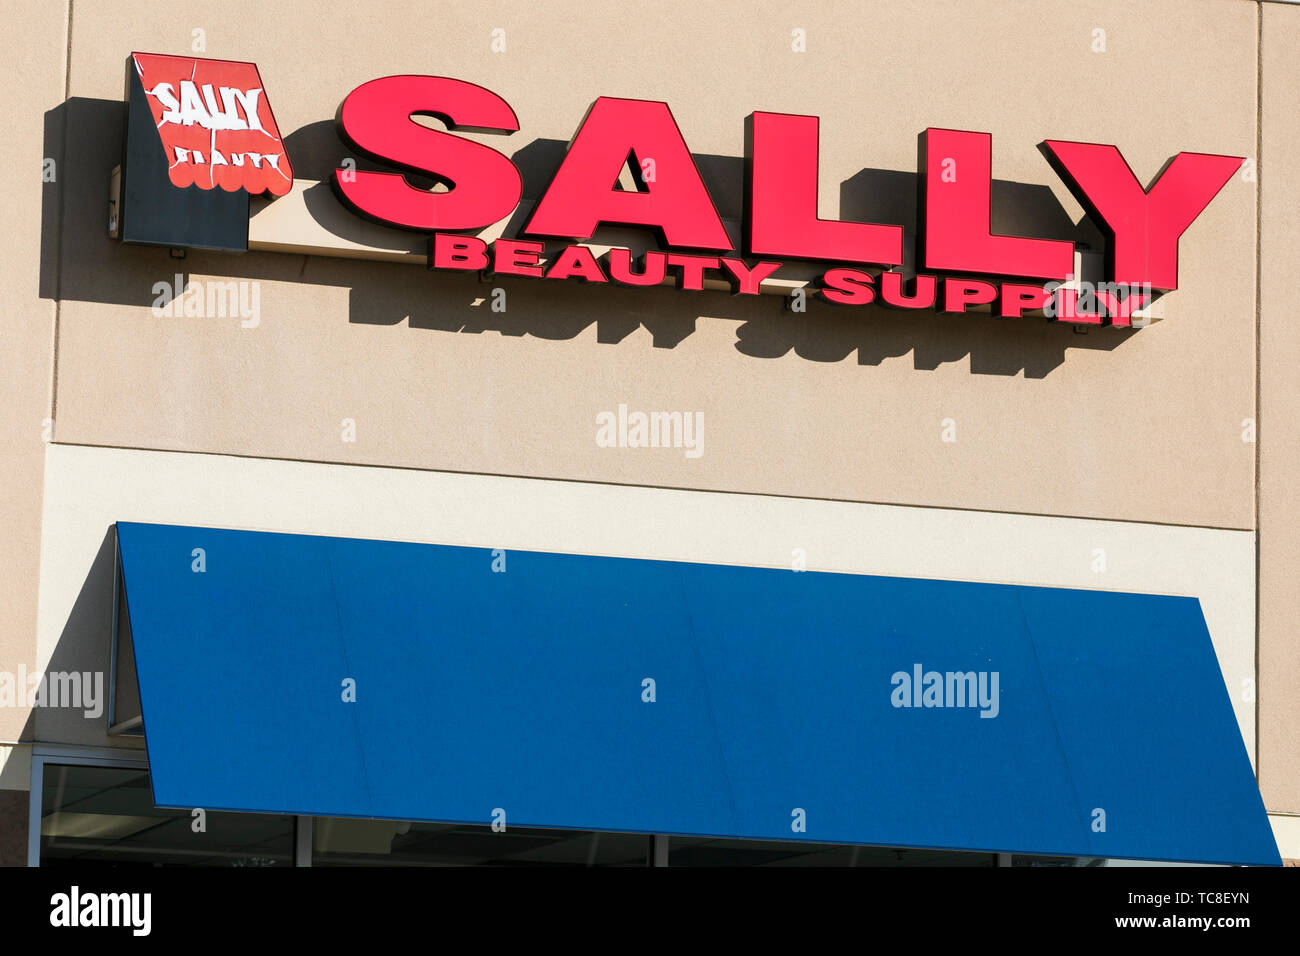 A logo sign outside of a Sally Beauty Supply retail store location in Martinsburg, West Virginia on June 4, 2019. Stock Photo